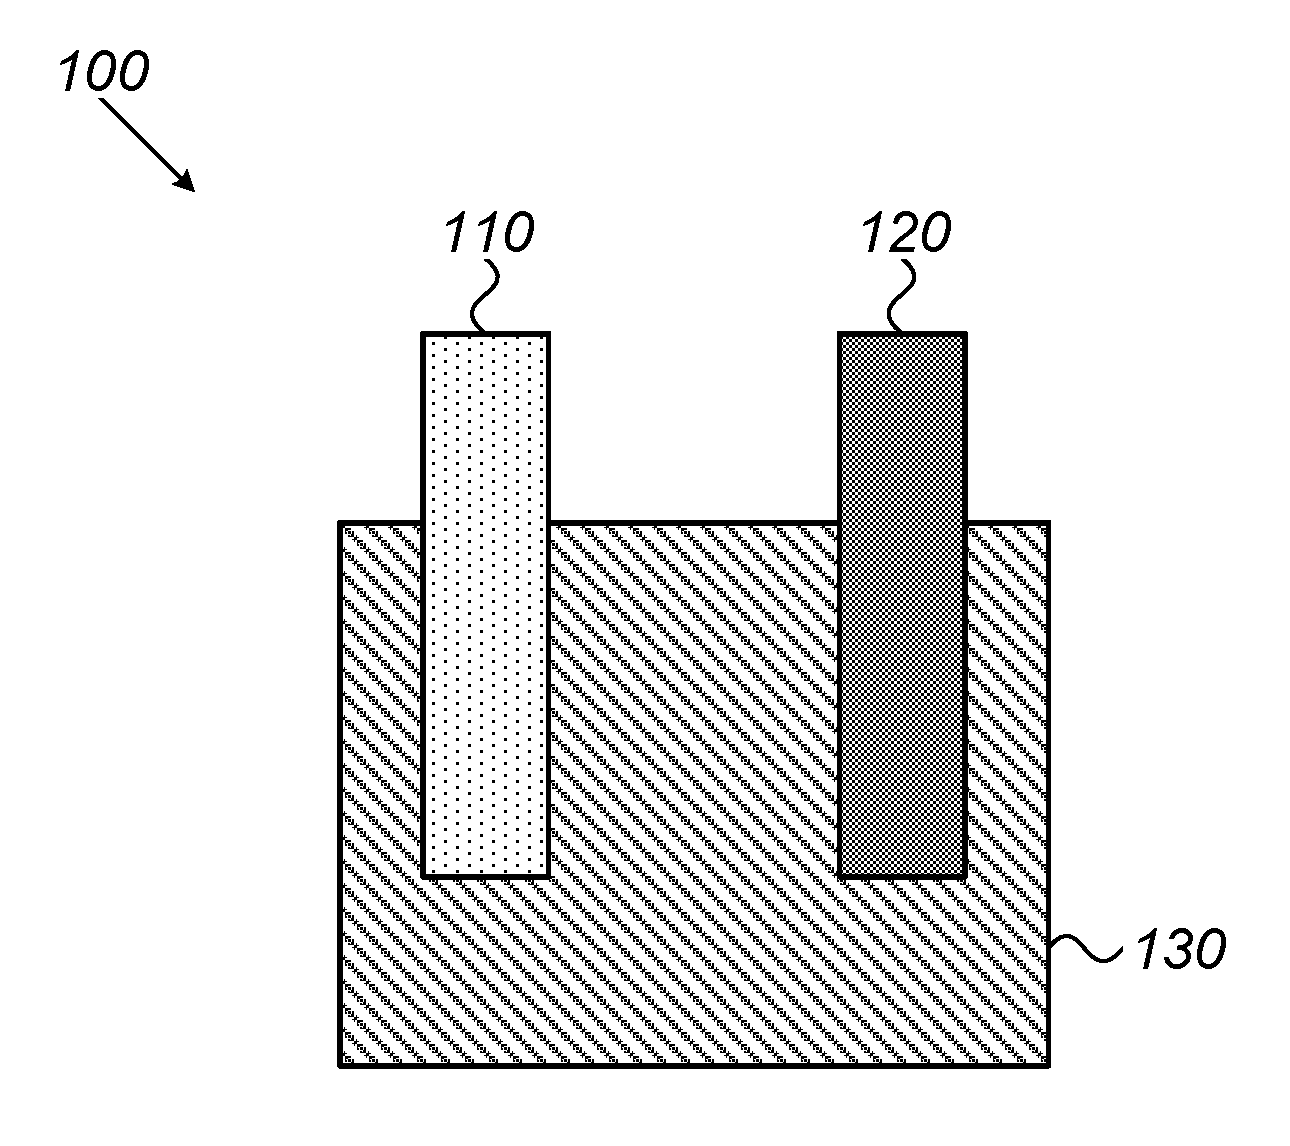 Germanium-containing active material for anodes for lithium-ion devices